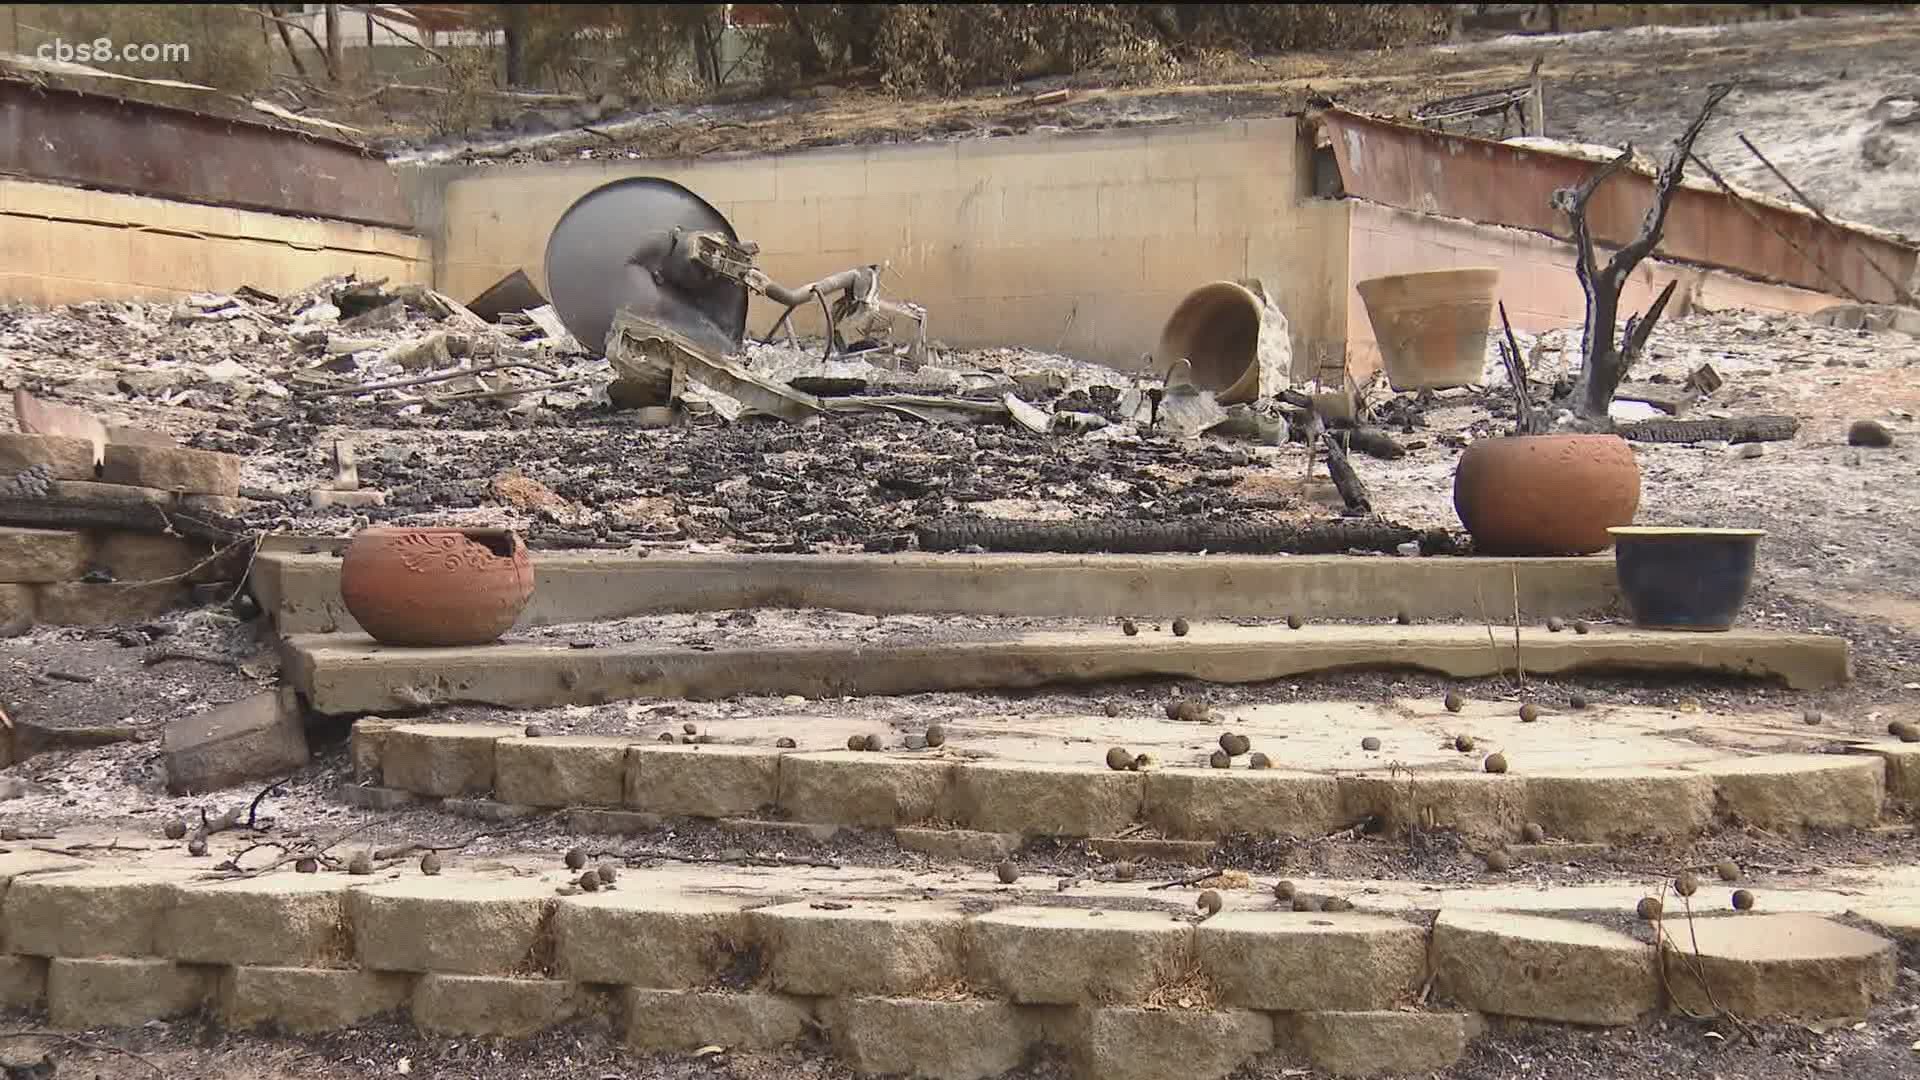 People who lost everything in the valley fire are still struggling to rebuild their lives. The fire out in East County last Sept. displaced a number of people.